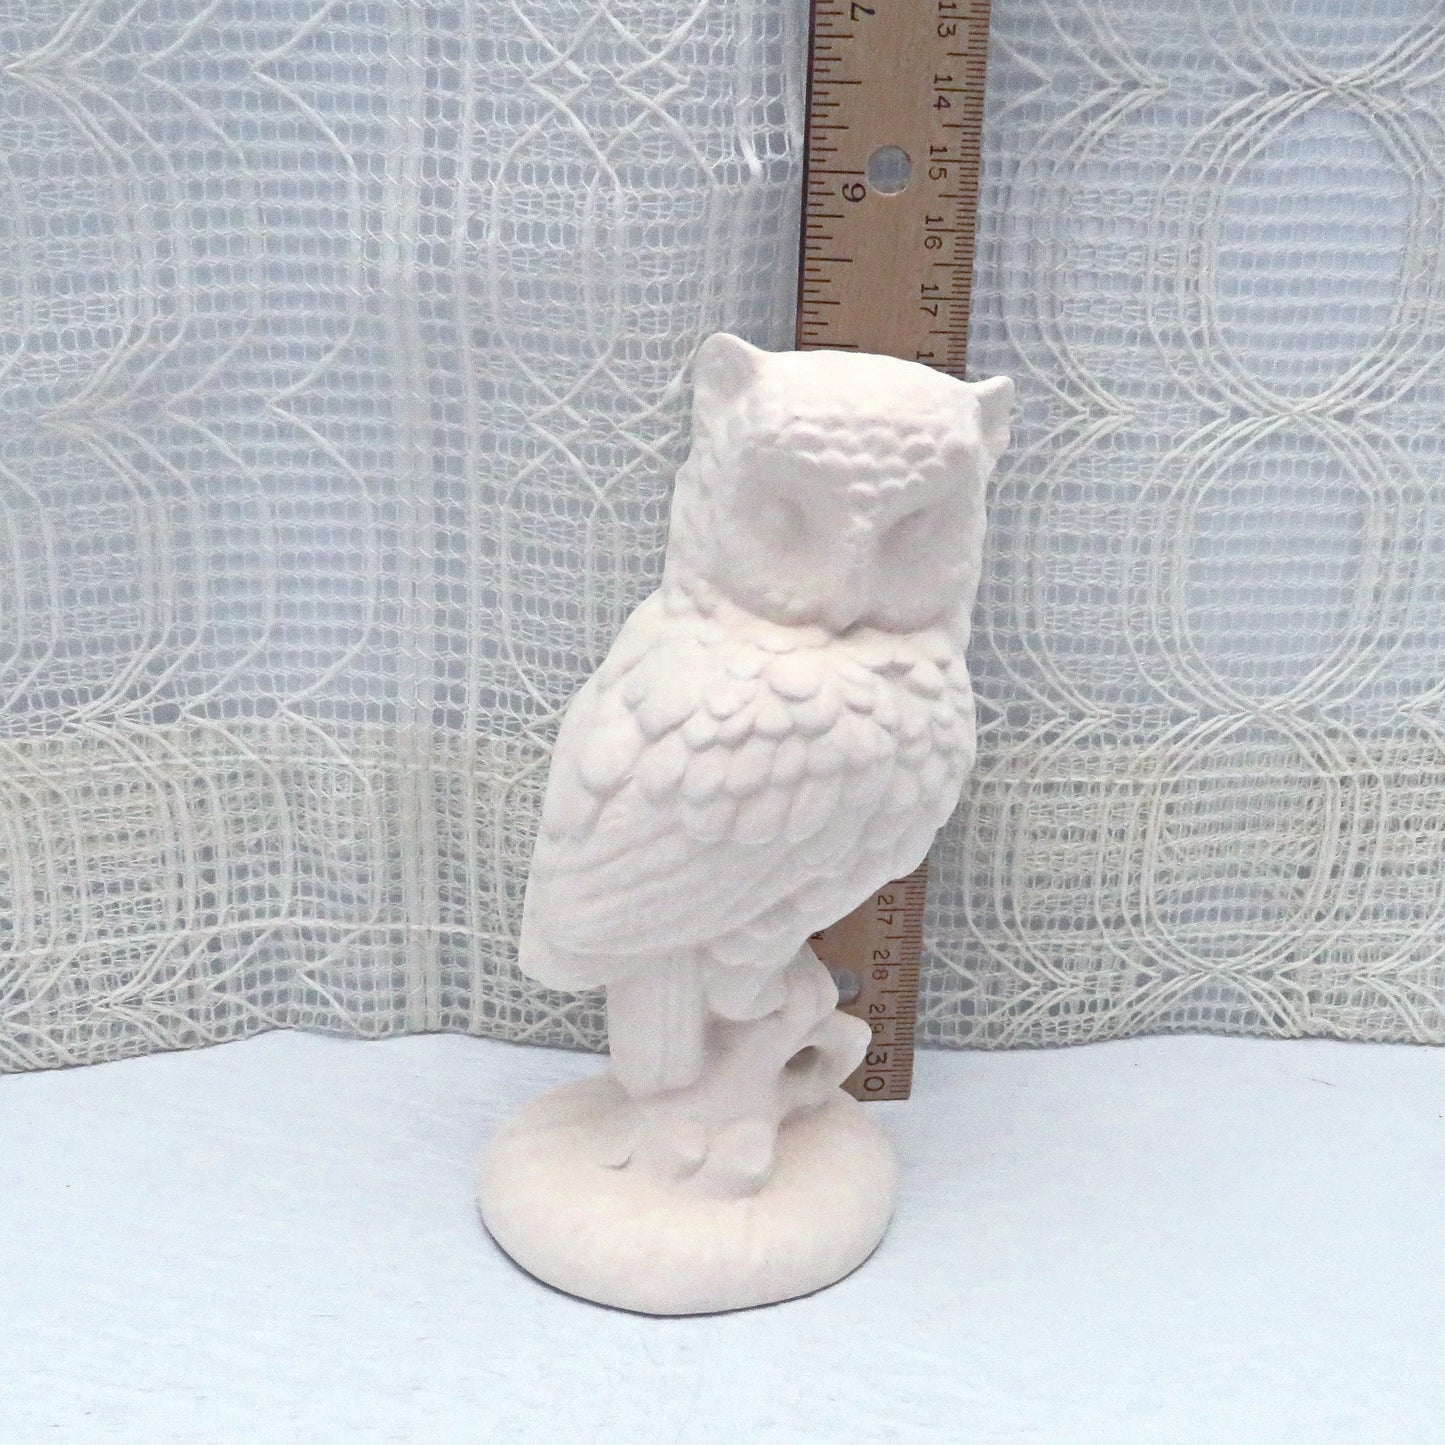 Unpainted Ceramic Bisque Owl Figurine, Ceramics to Paint, Ready to Paint Owl Statue, Owl Decor, Owl Gift